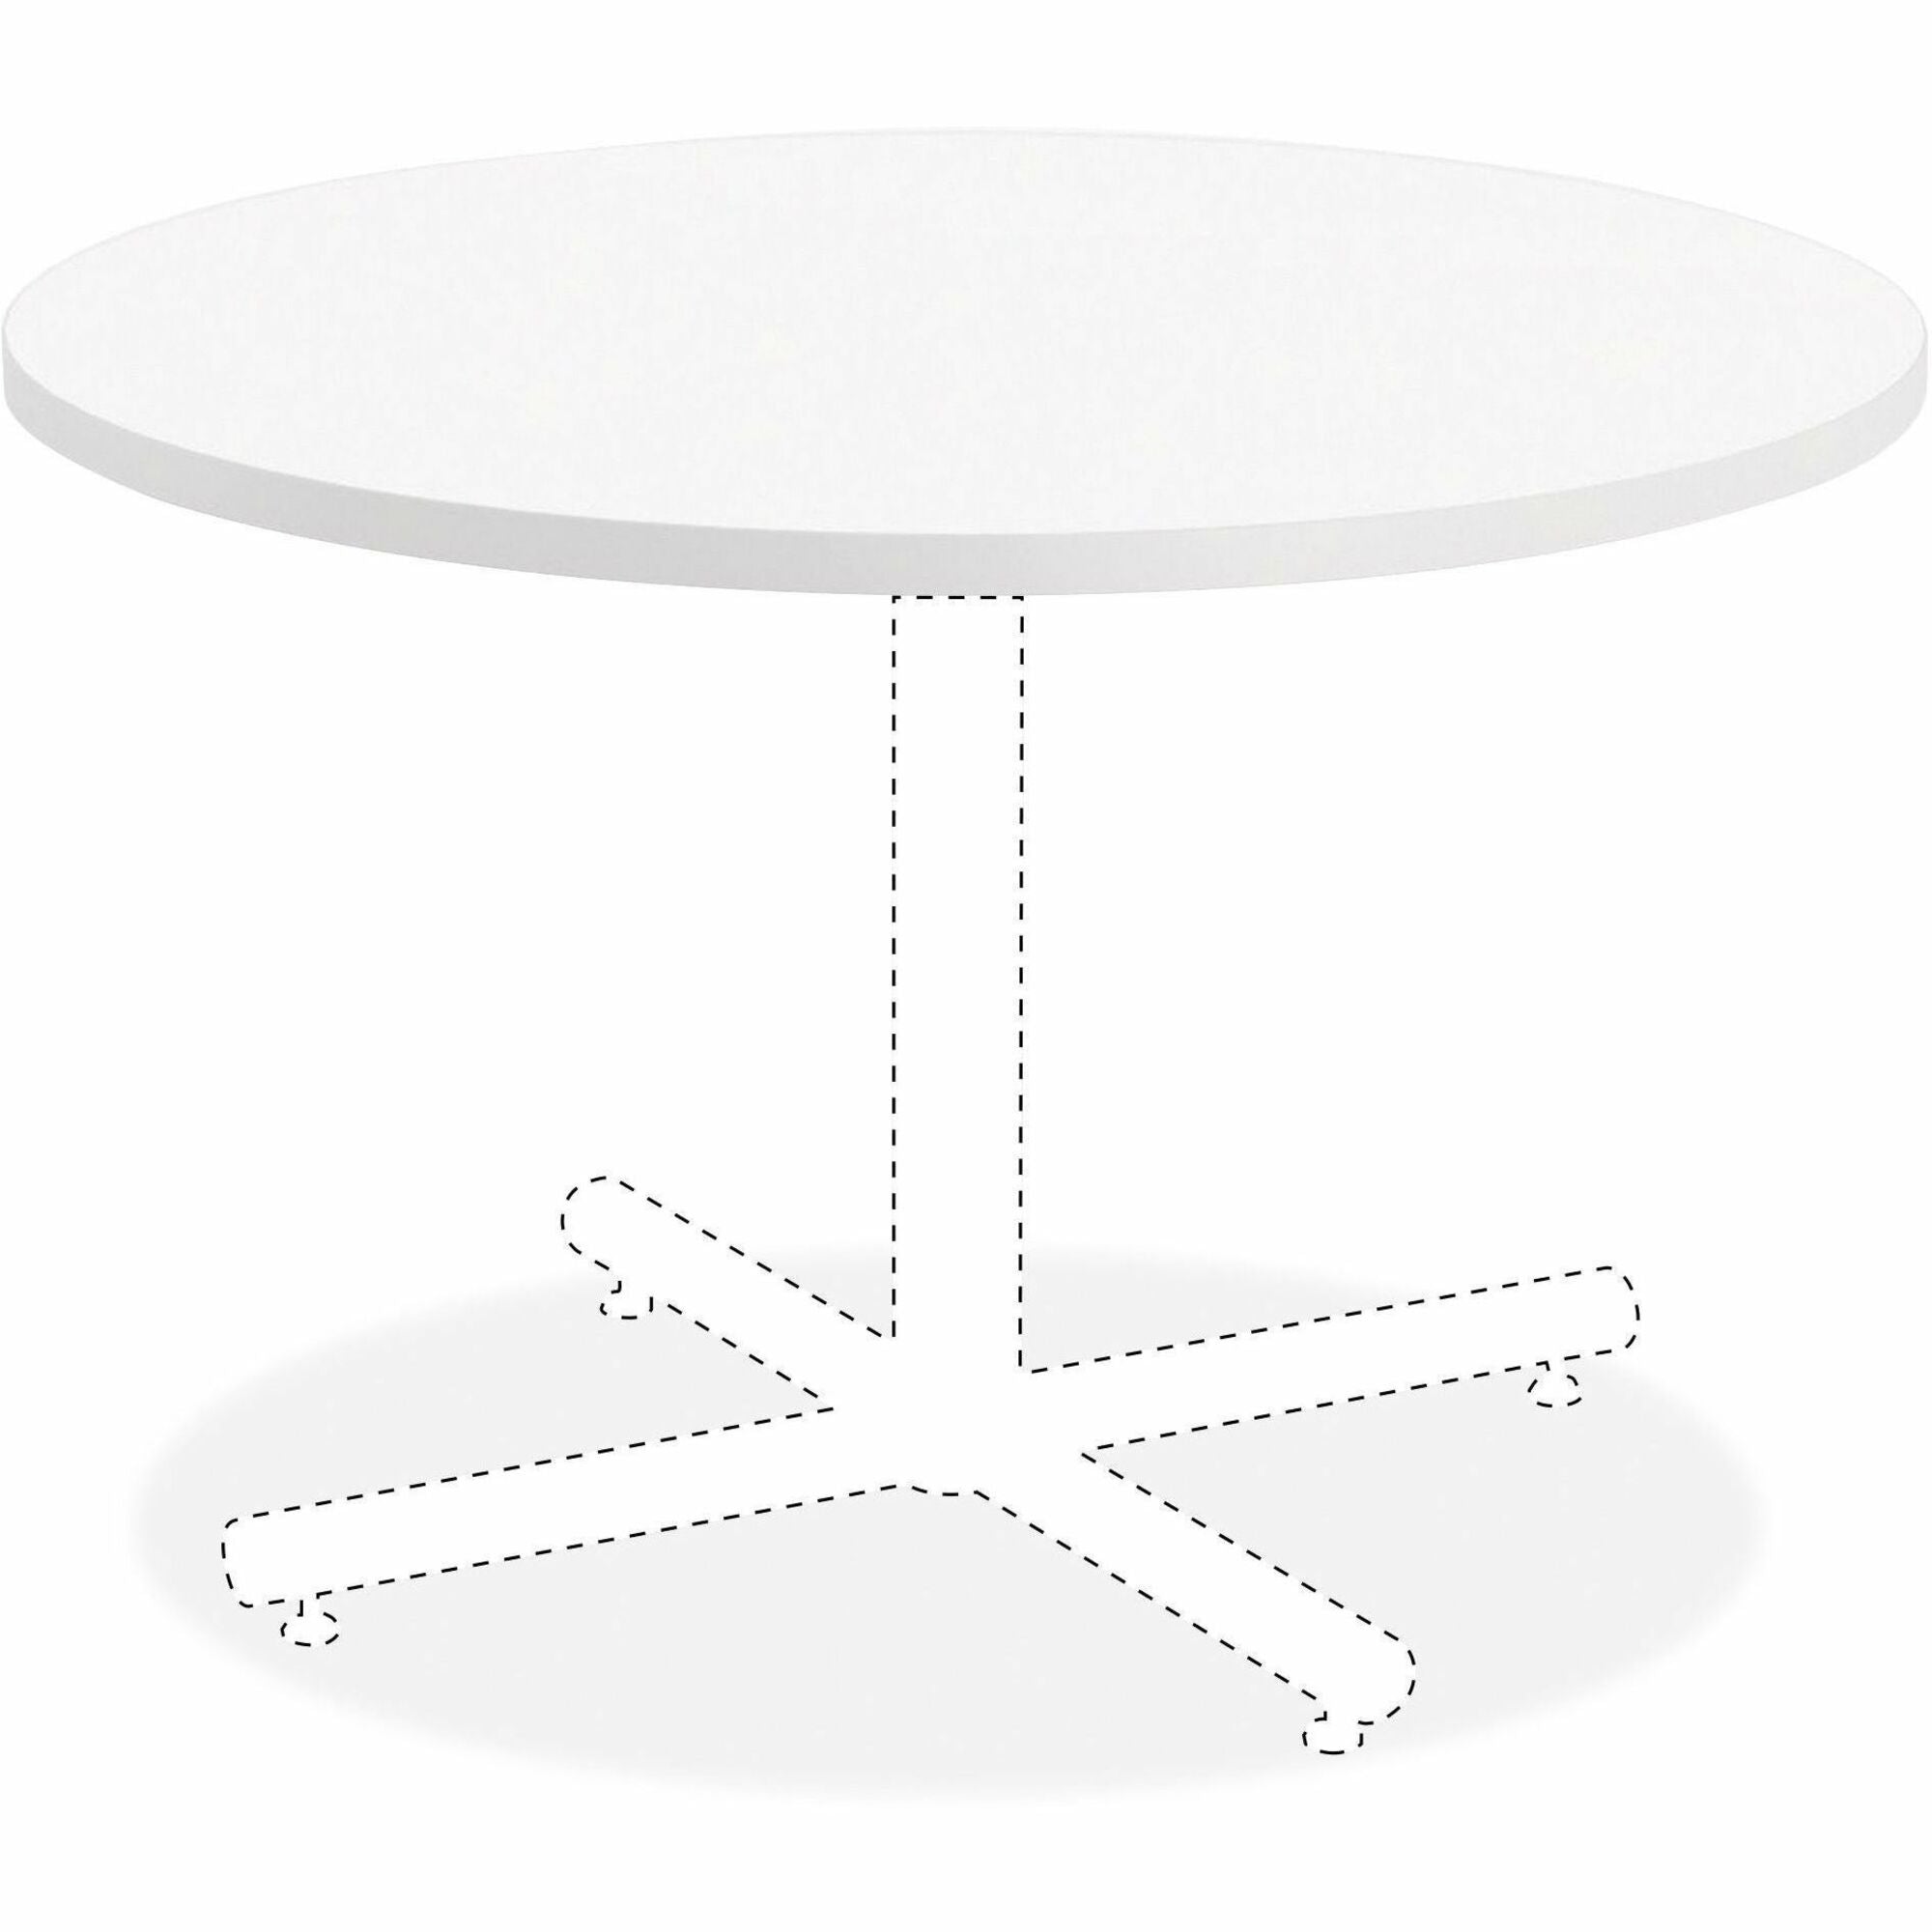 lorell-hospitality-collection-tabletop-for-table-tophigh-pressure-laminate-hpl-round-white-top-x-125-table-top-thickness-x-36-table-top-diameter-assembly-required-thermofused-laminate-tfl-particleboard-top-material-1-each_llr99856 - 1